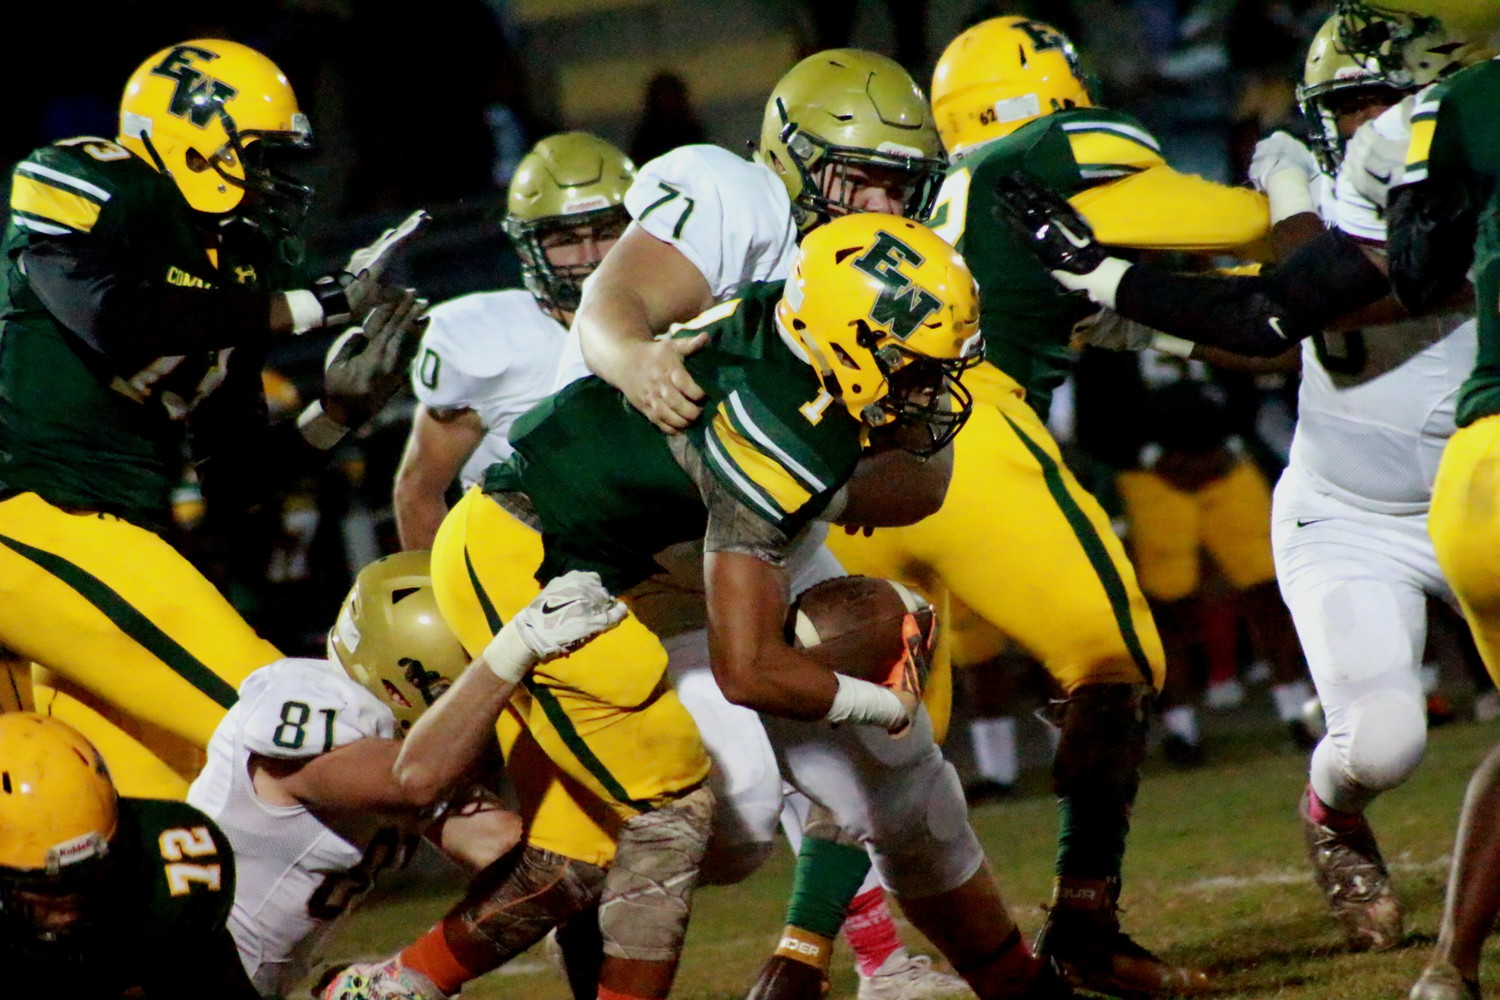 Fleming Island defensive linemen Jake Libretto, No. 81, and Will Hudgins, No. 71, 
manhandled Ed White ballcarrier in Golden Eagles’ 20-6 win Thursday night.